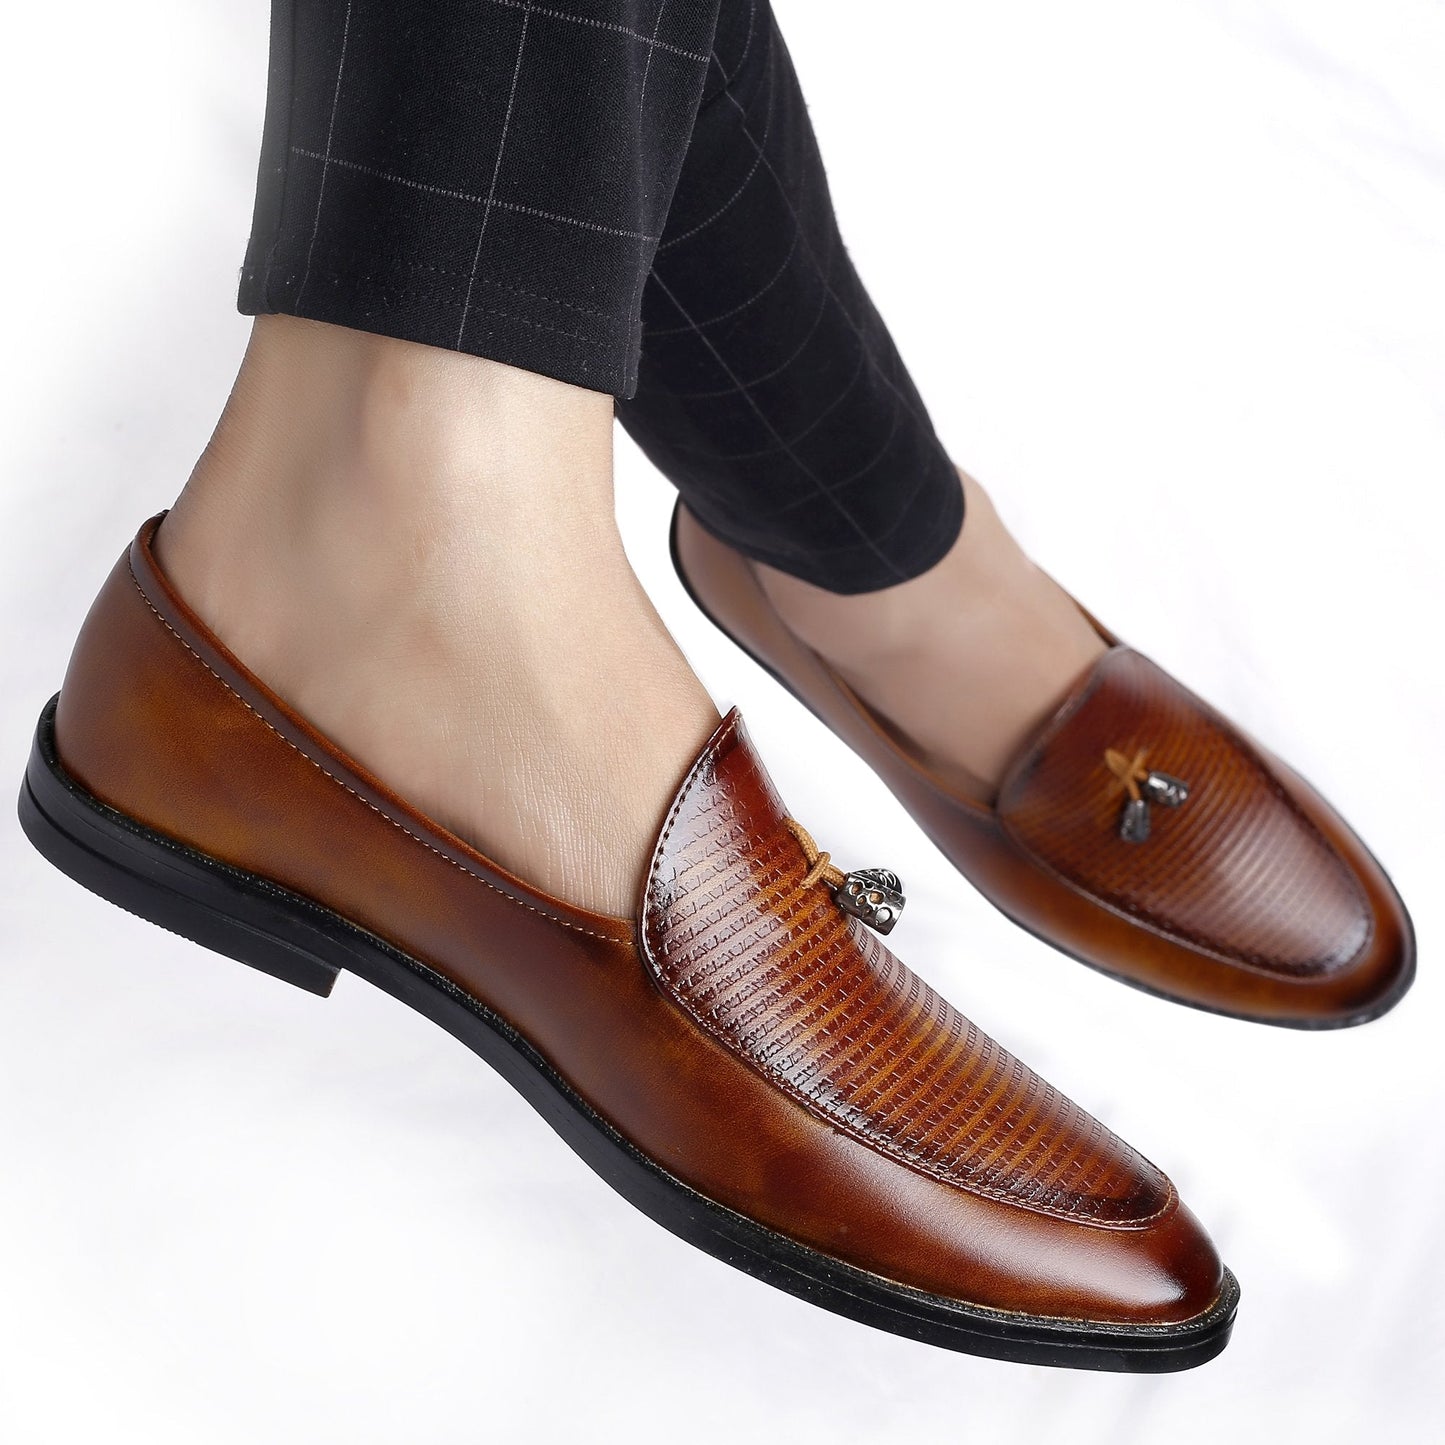 Stylish Moccasin Loafer Slip on For Men Party And Casual Wear -JackMarc - JACKMARC.COM